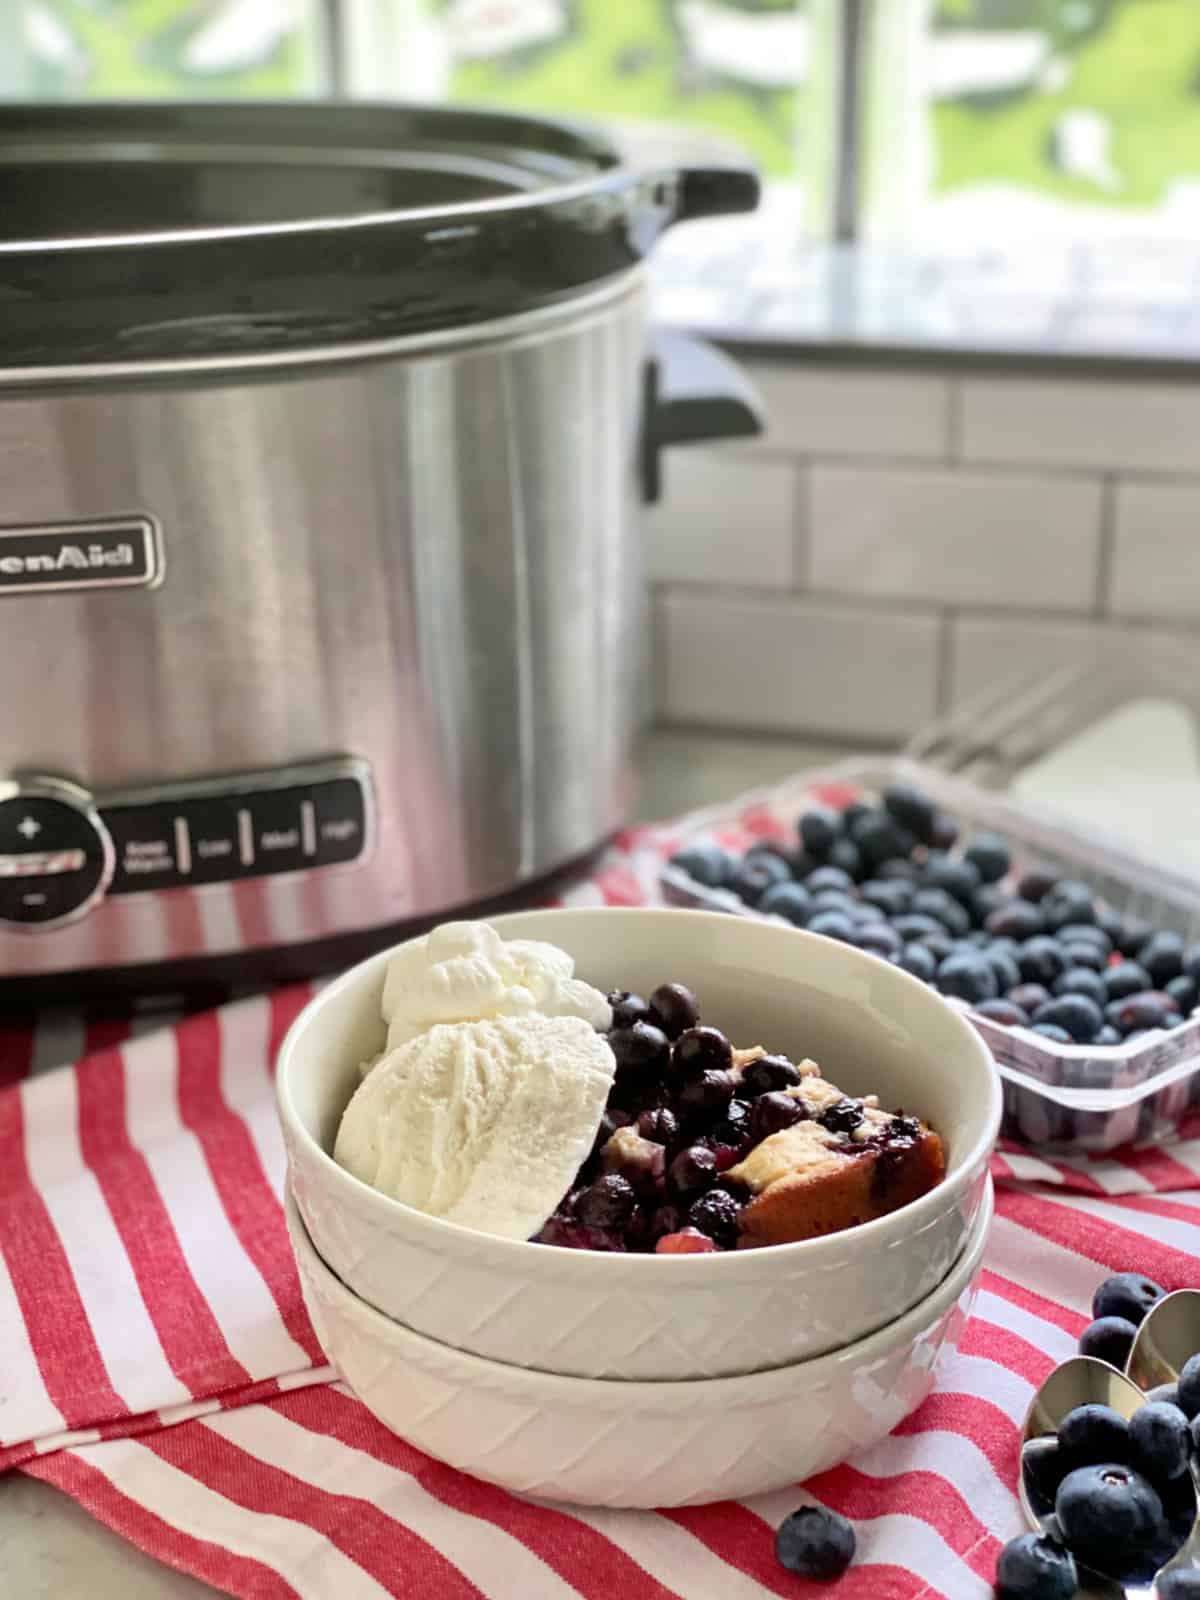 Two white bowls stacked with blueberry cobbler and vanilla ice cream with a stainless steel slow cooker in background.